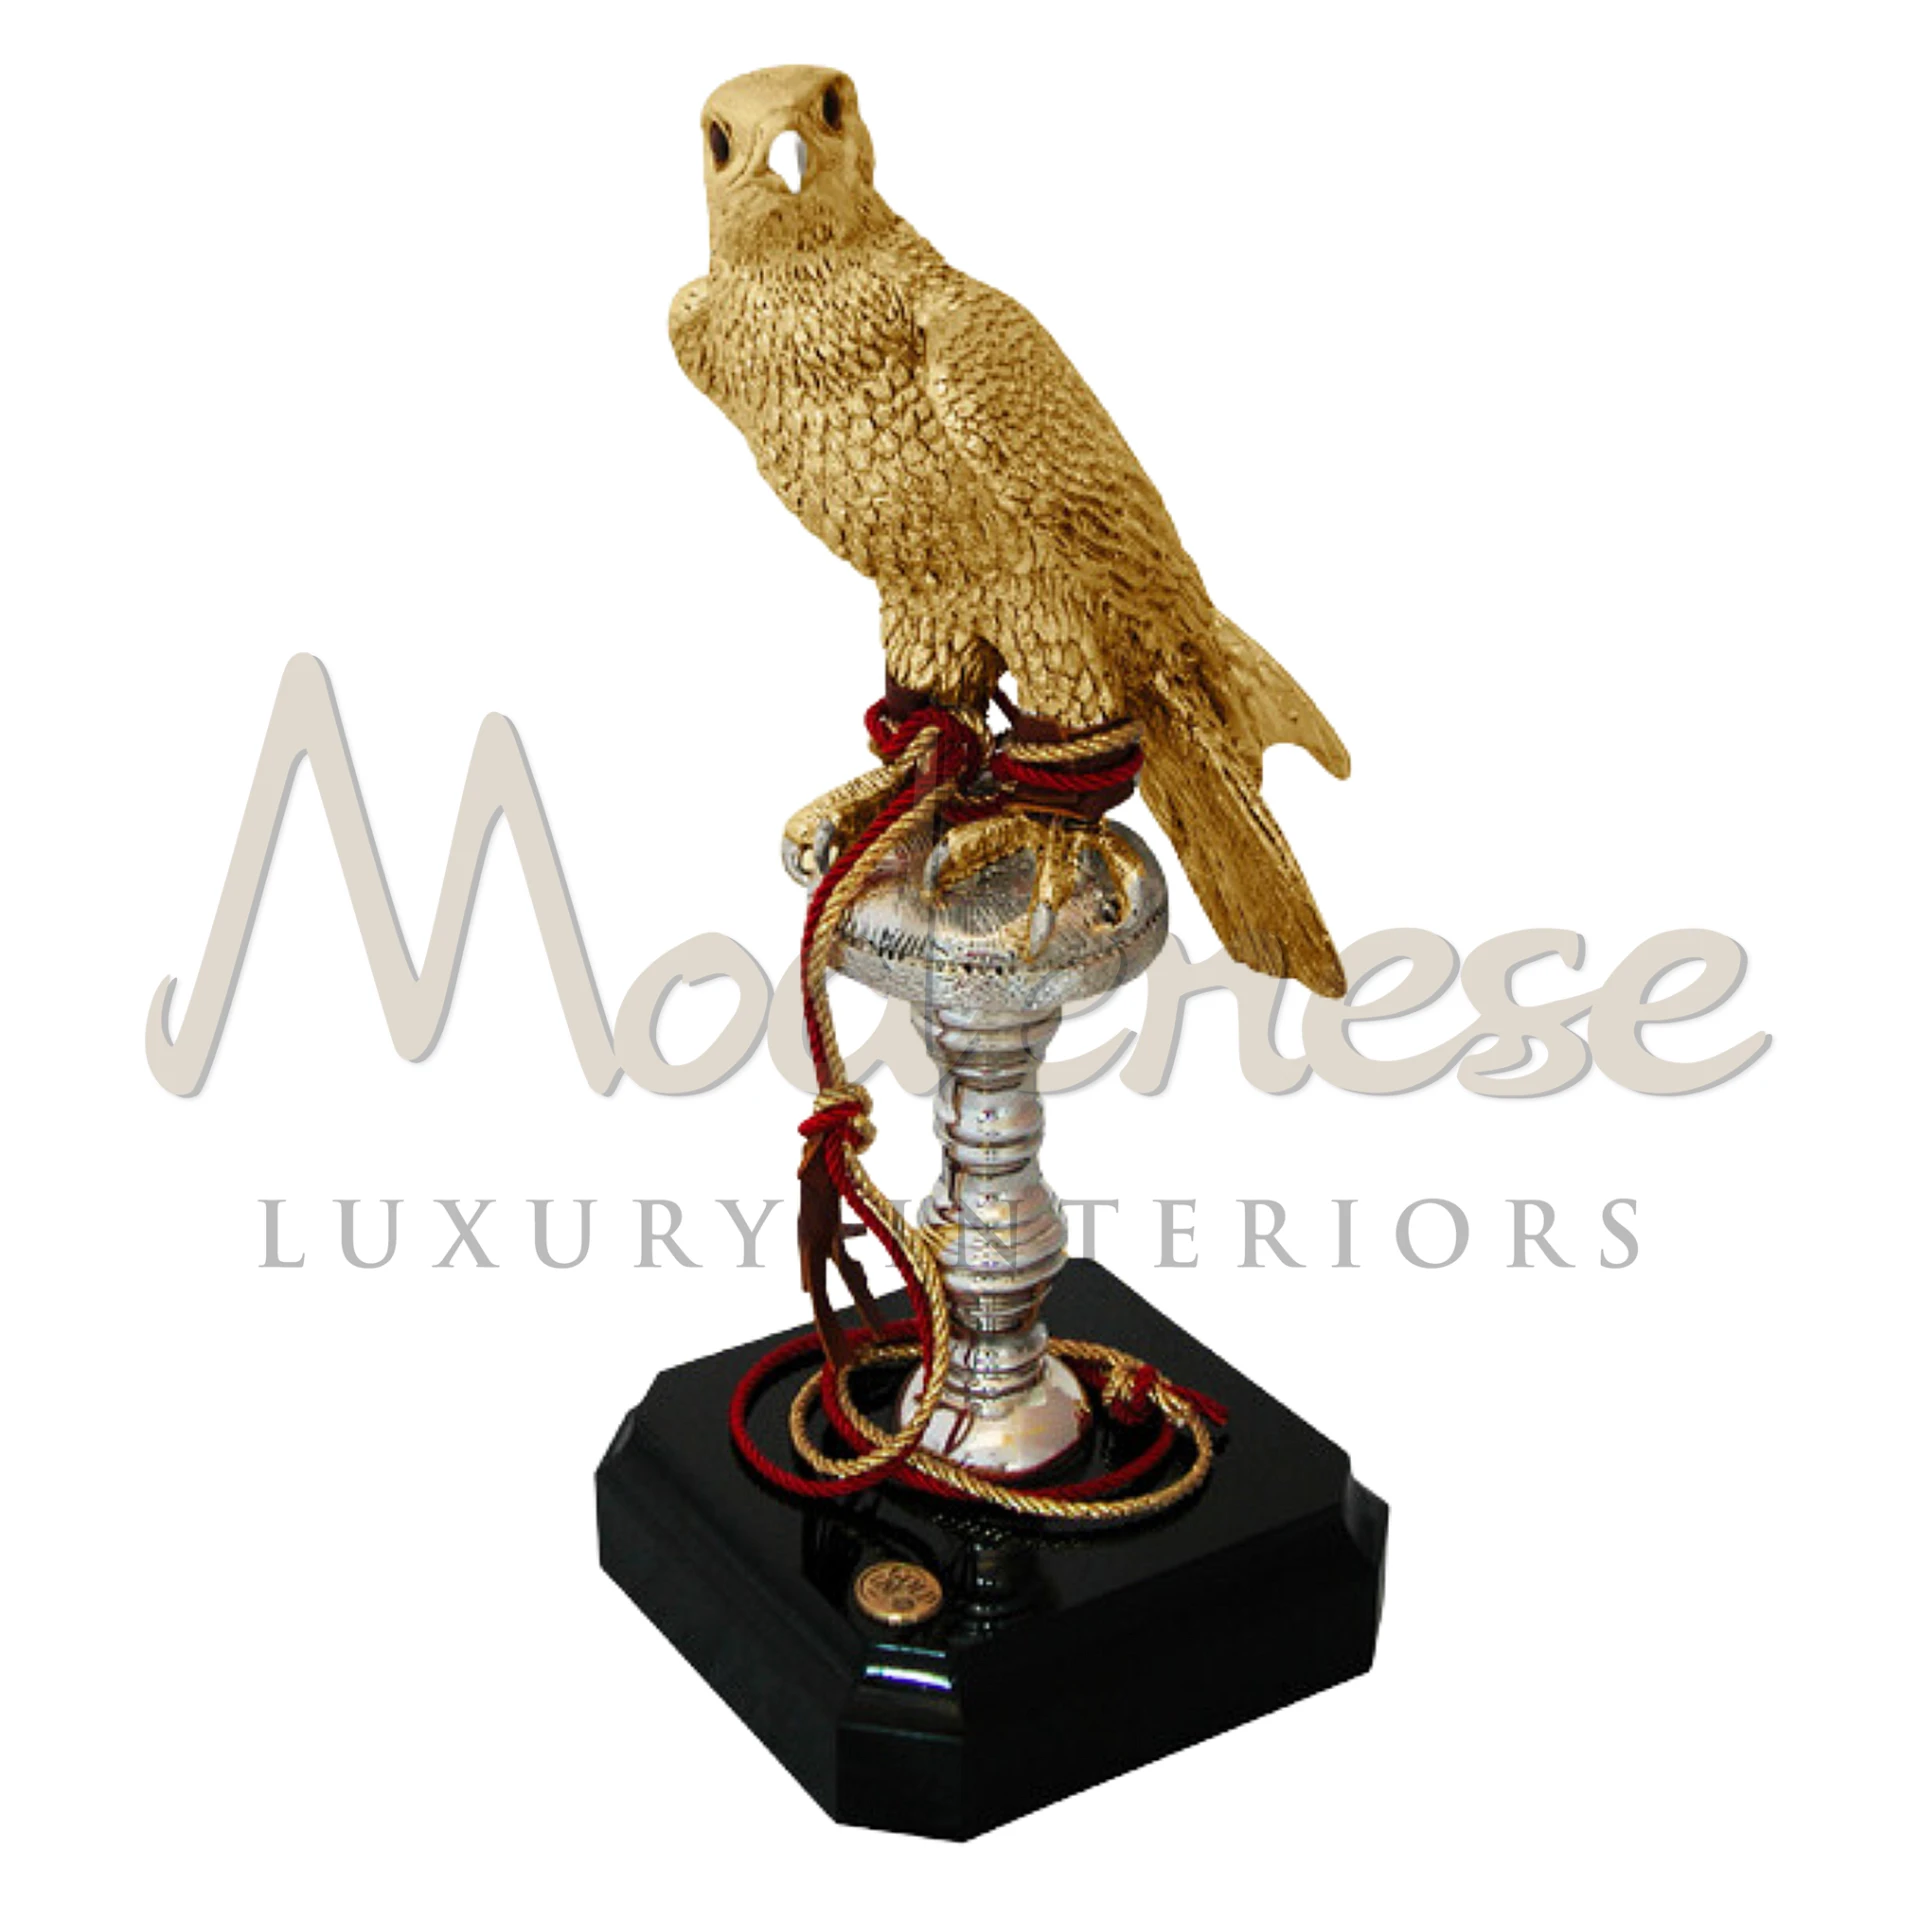 Elegant Classic Gold Falcon statuette in dynamic pose, with detailed gold leaf, embodying luxury and classic style for interior design.